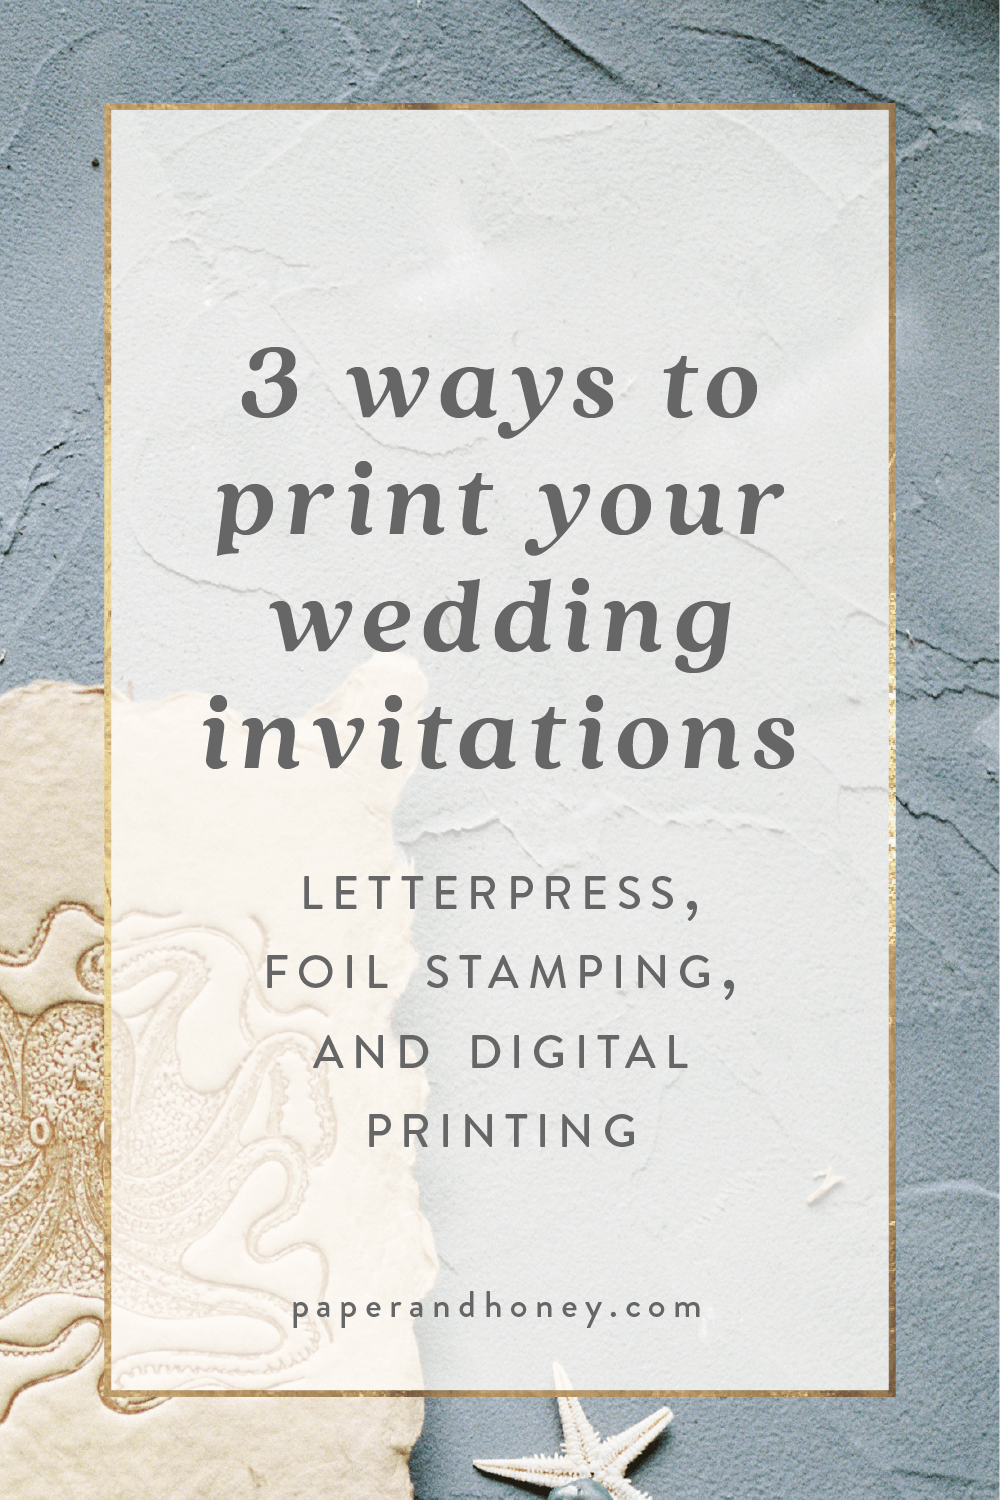 3 ways to print your wedding invitations and stationery: letterpress, gold foil, and digital printing | letterpress print studio creating heirloom quality wedding invites, serving Detroit, Ann Arbor, and Grand Rapids, Michigan | by Paper & Honey®, www.paperandhoney.com / www.instagram.com/paperandhoney / #letterpress #goldfoil #weddinginvites #weddinginvitations #printshop